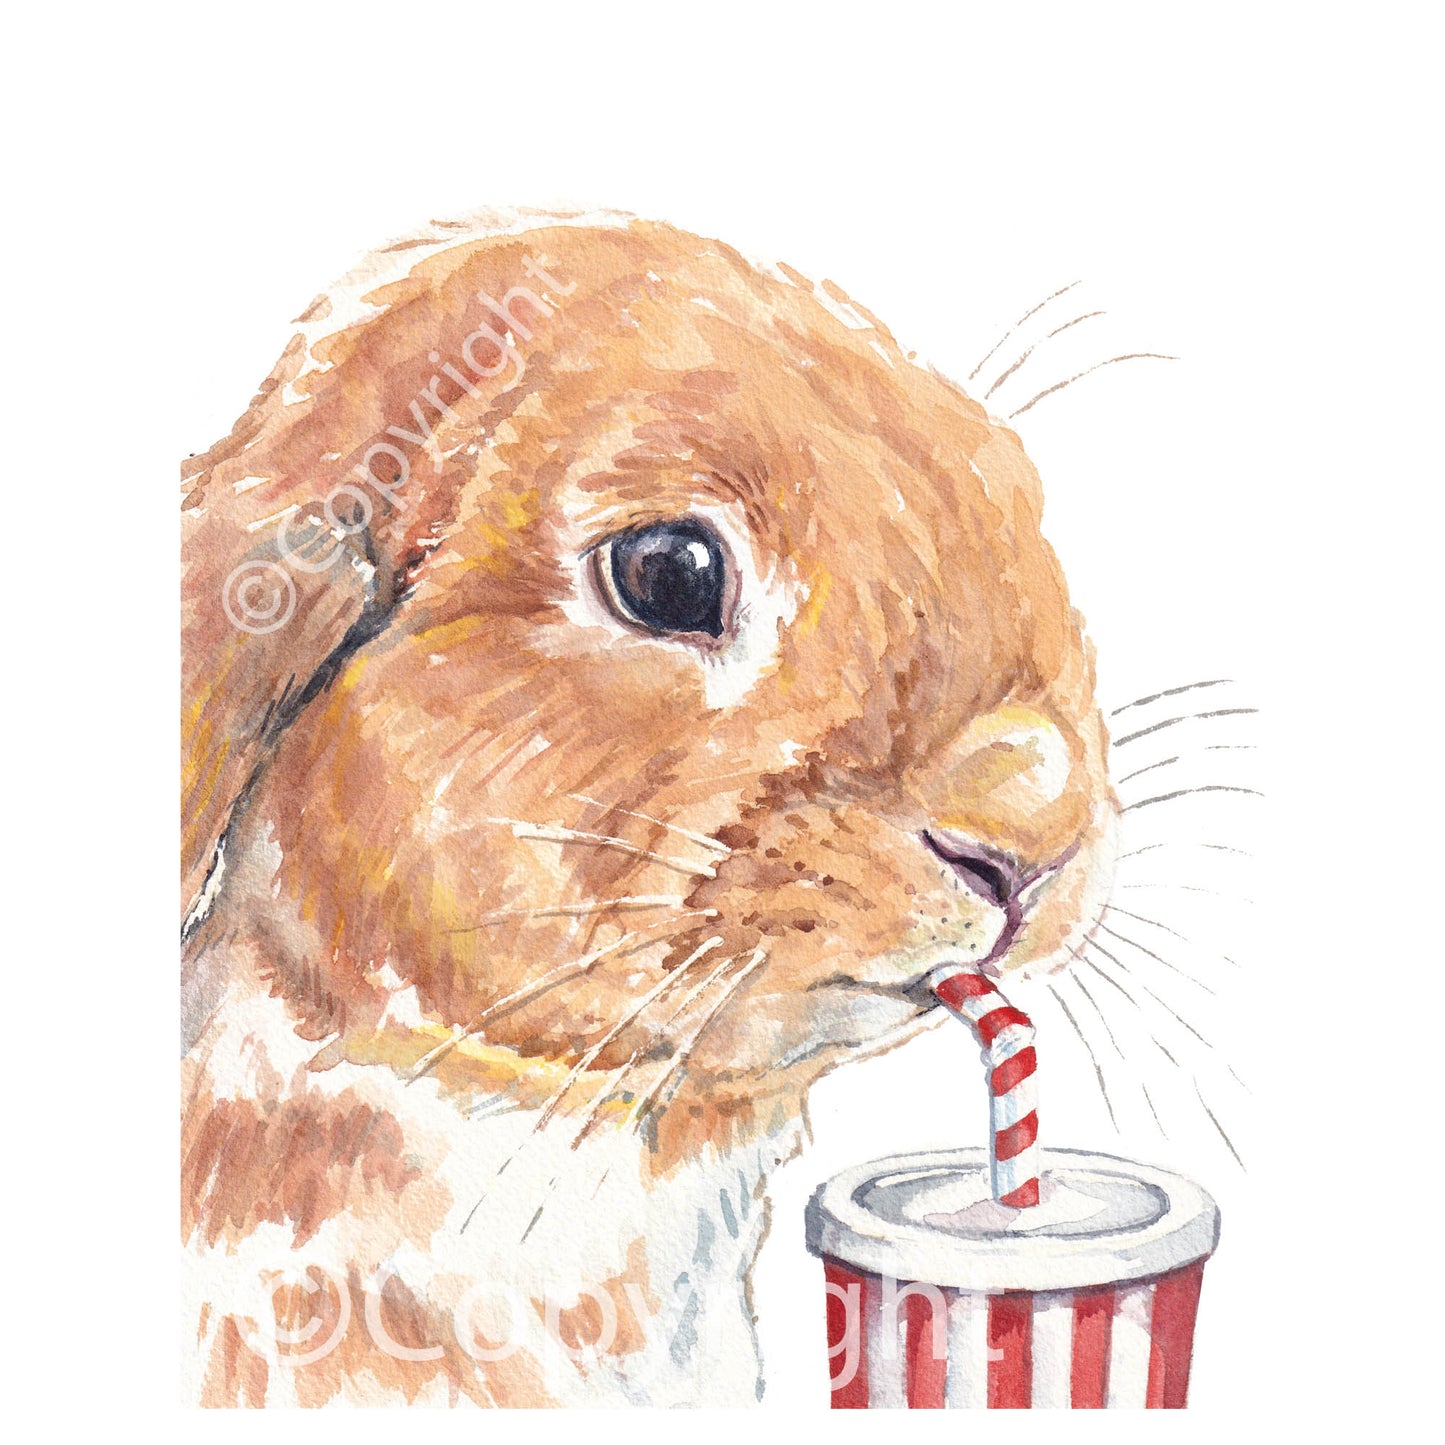 Watercolour painting of a lop eared bunny rabbit sipping a drink from a stripped straw. Art by Deidre Wicks